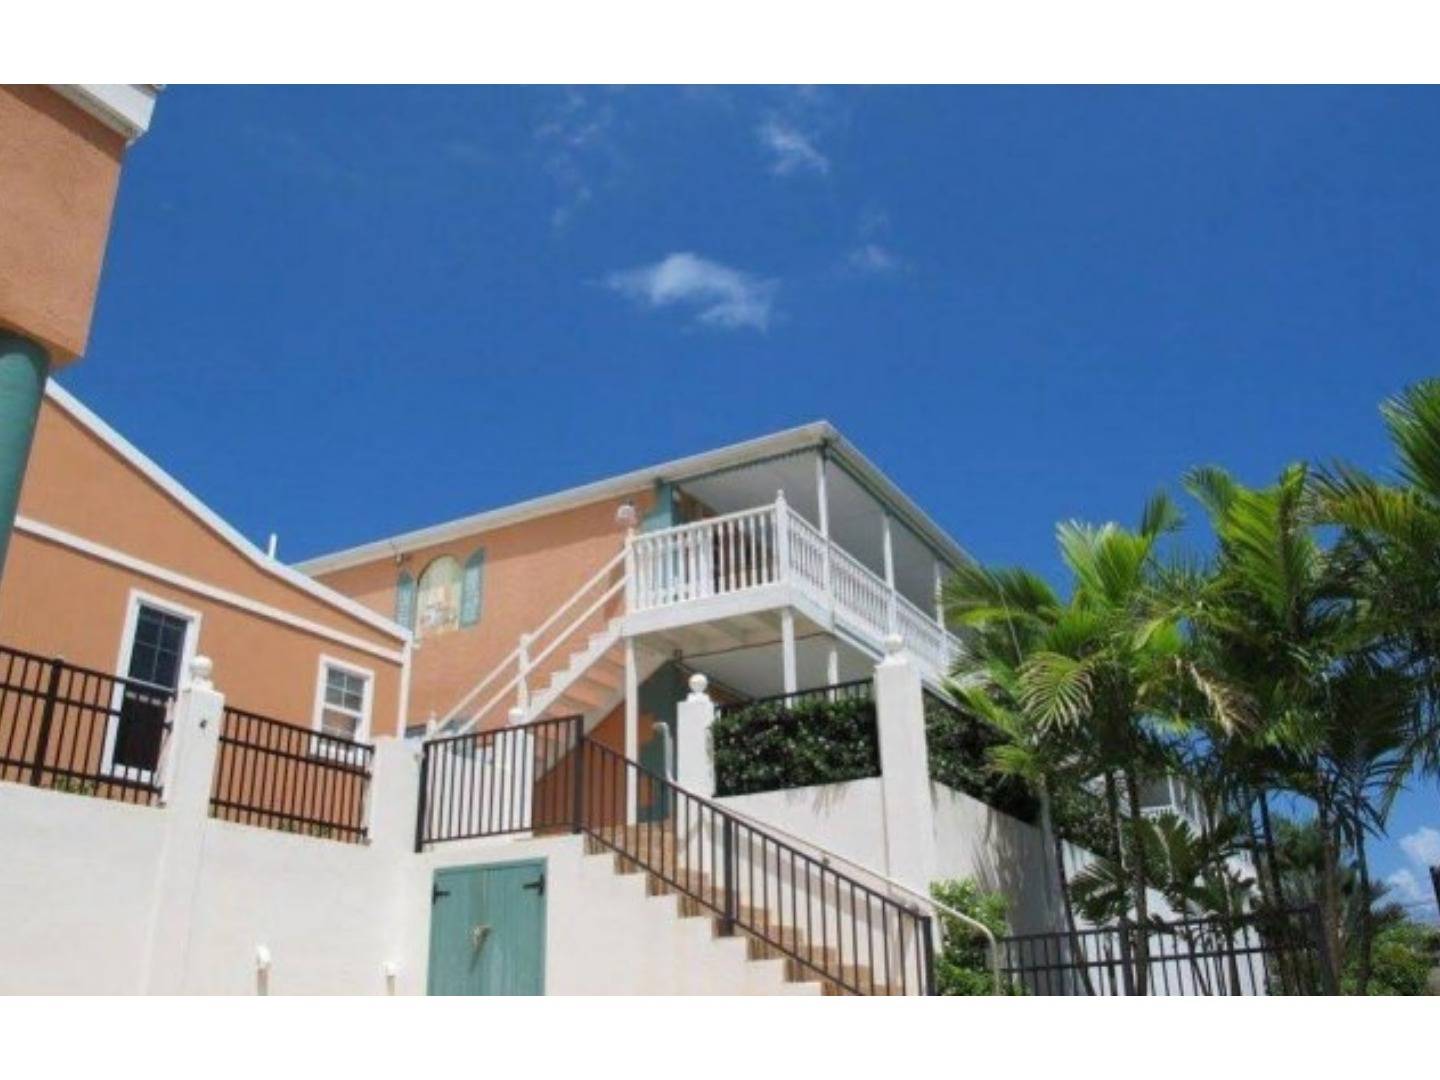 Christiansted Vacation Rental